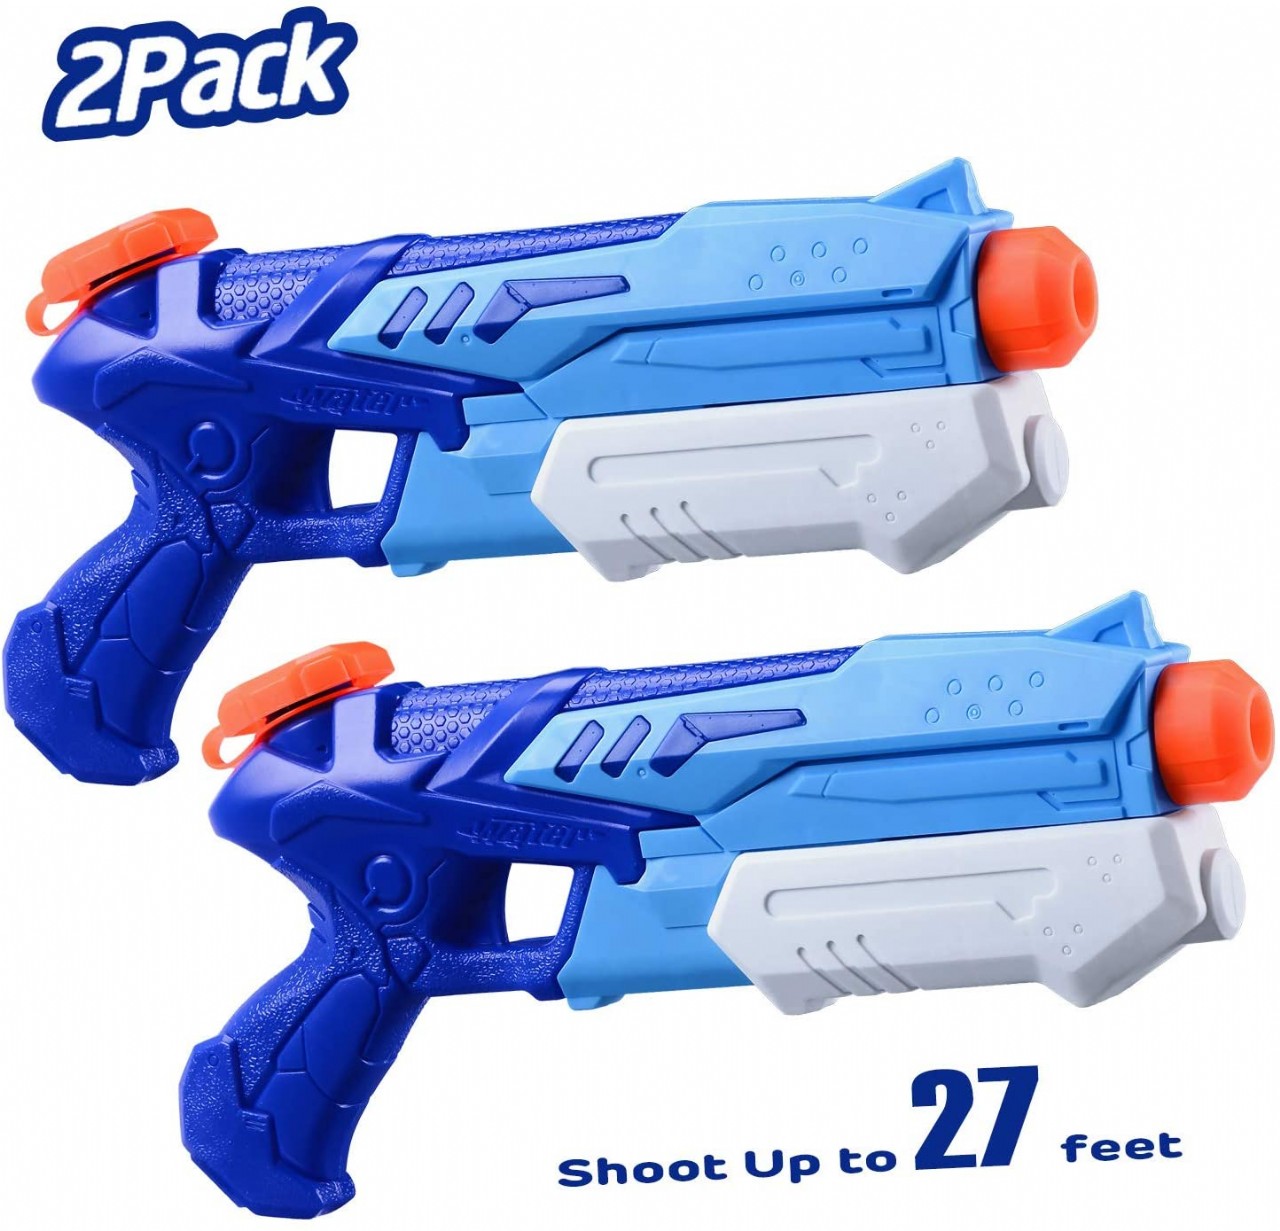 HITOP Water Guns for Kids, 2 Pack Super Squirt Guns Water Soaker Blaster 300CC Toys Gifts